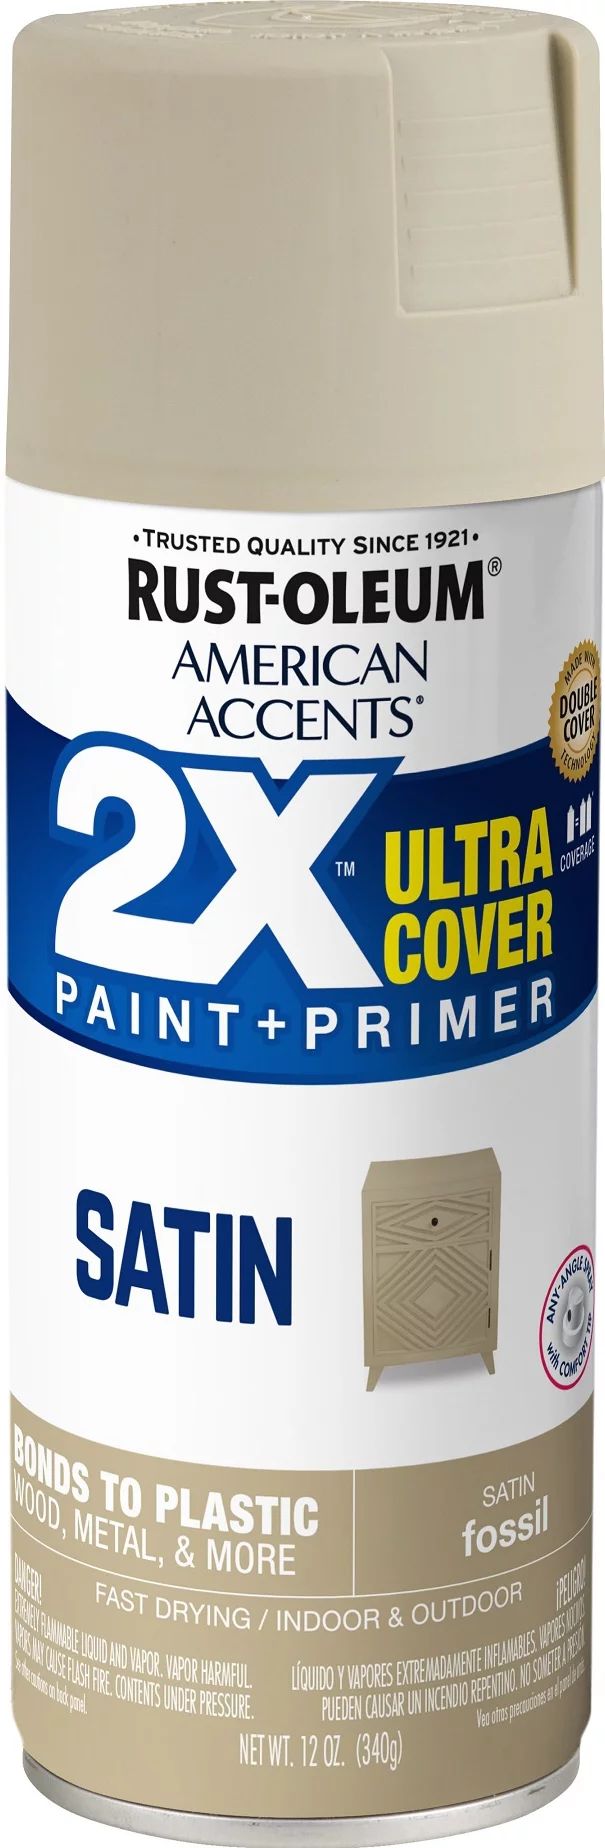 Fossil, Rust-Oleum American Accents 2X Ultra Cover Satin Spray Paint, 12 oz | Walmart (US)